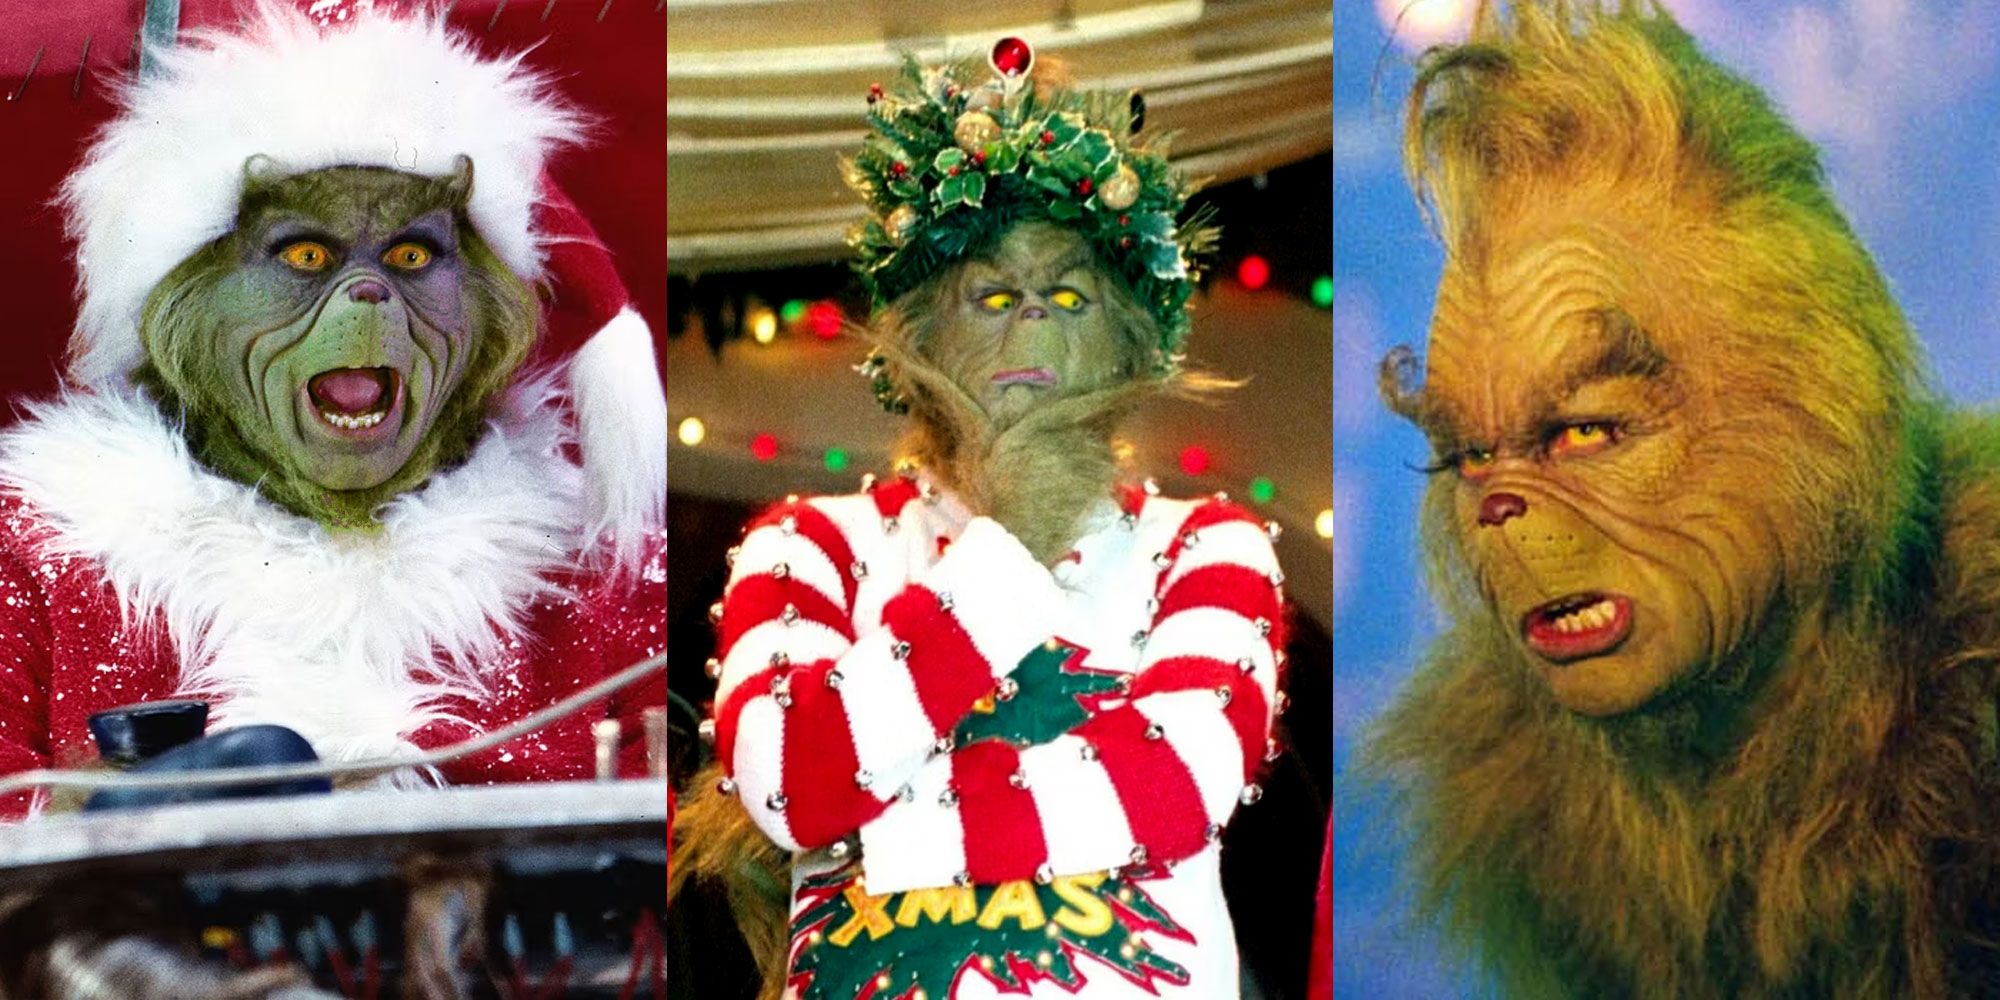 Split image of the Grinch in the live-action How the Grinch Stole Christmas